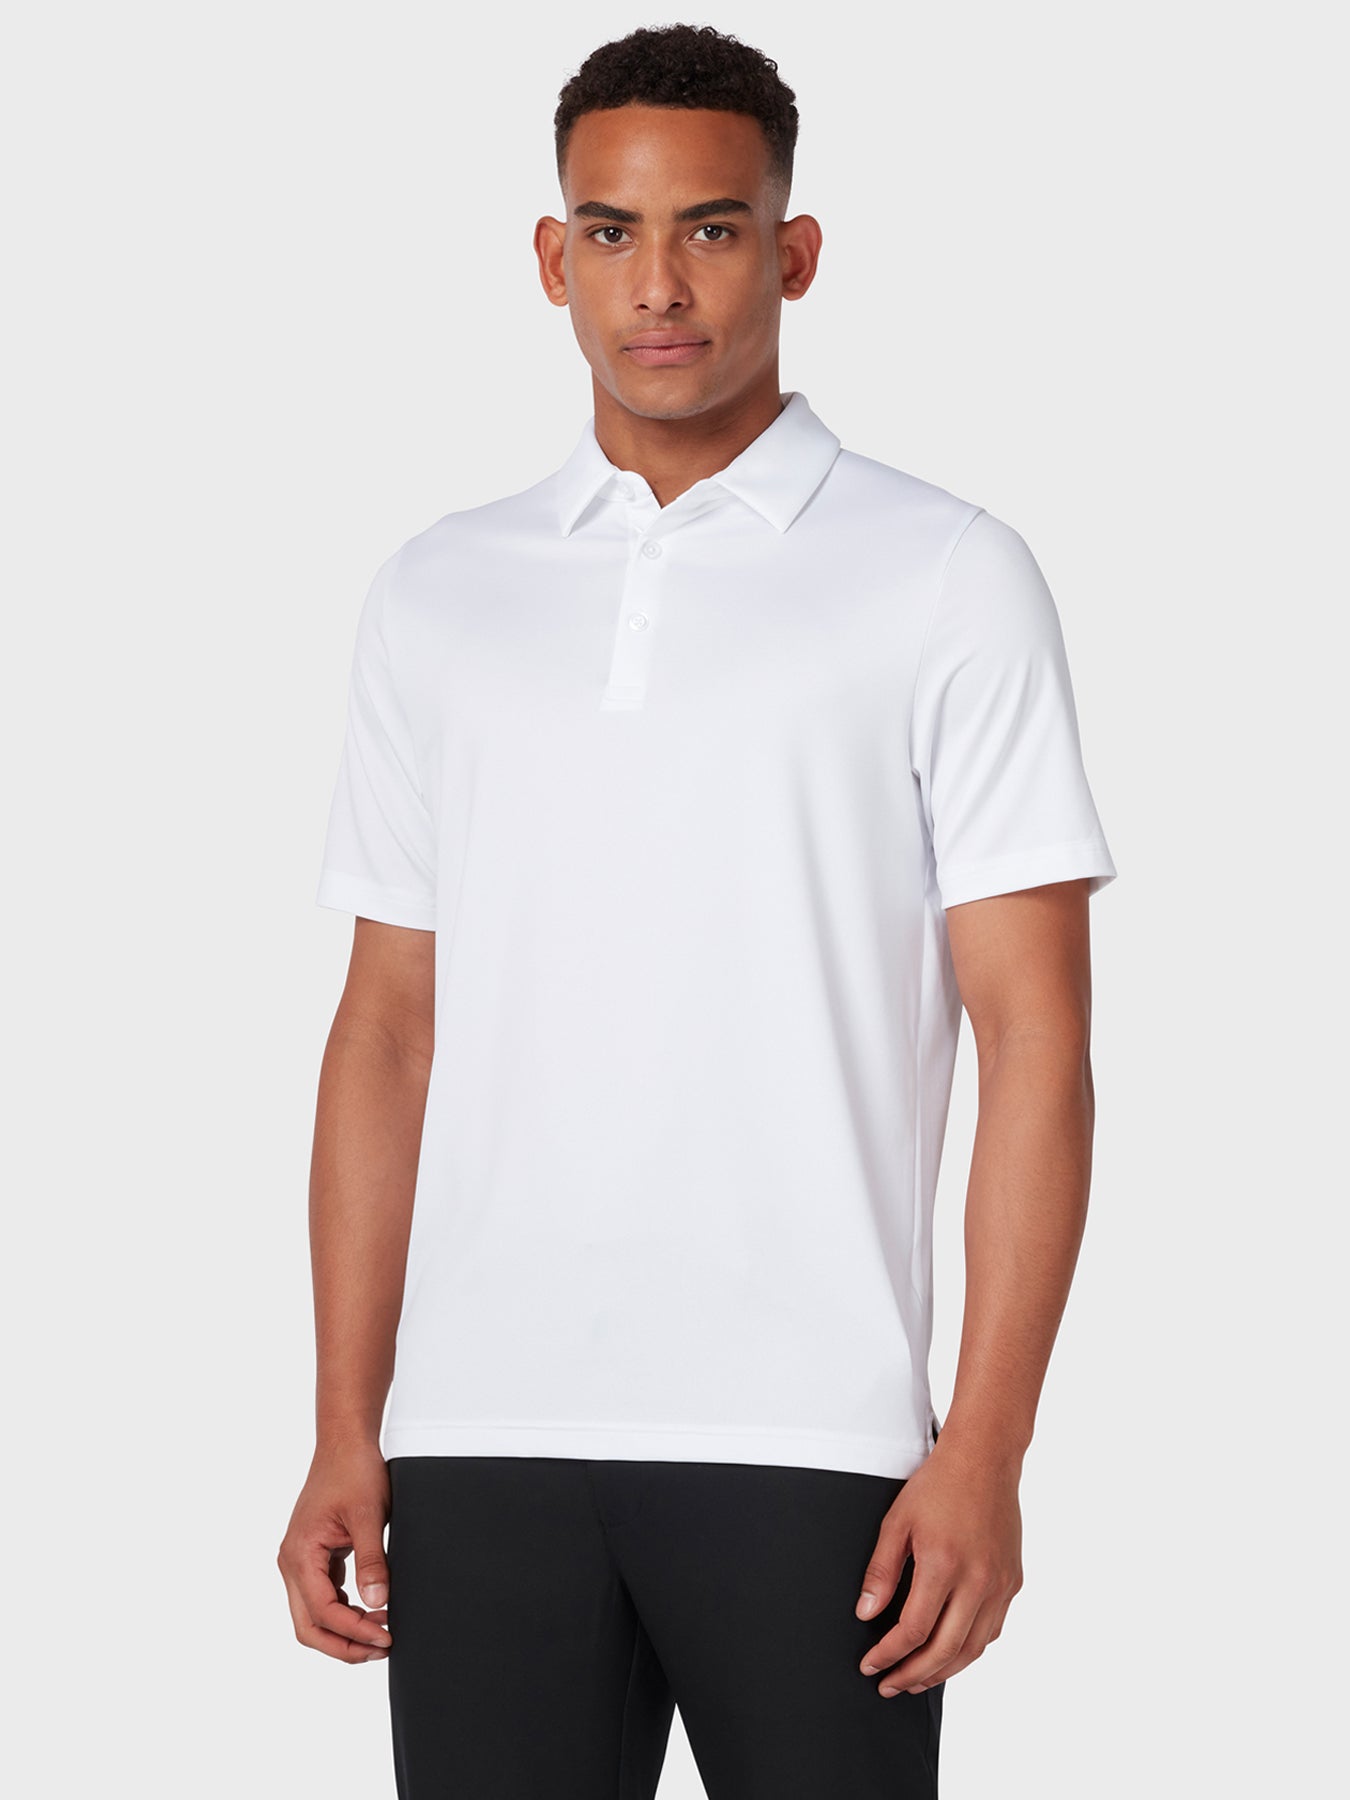 View Swing Tech Tour Polo In Bright White information